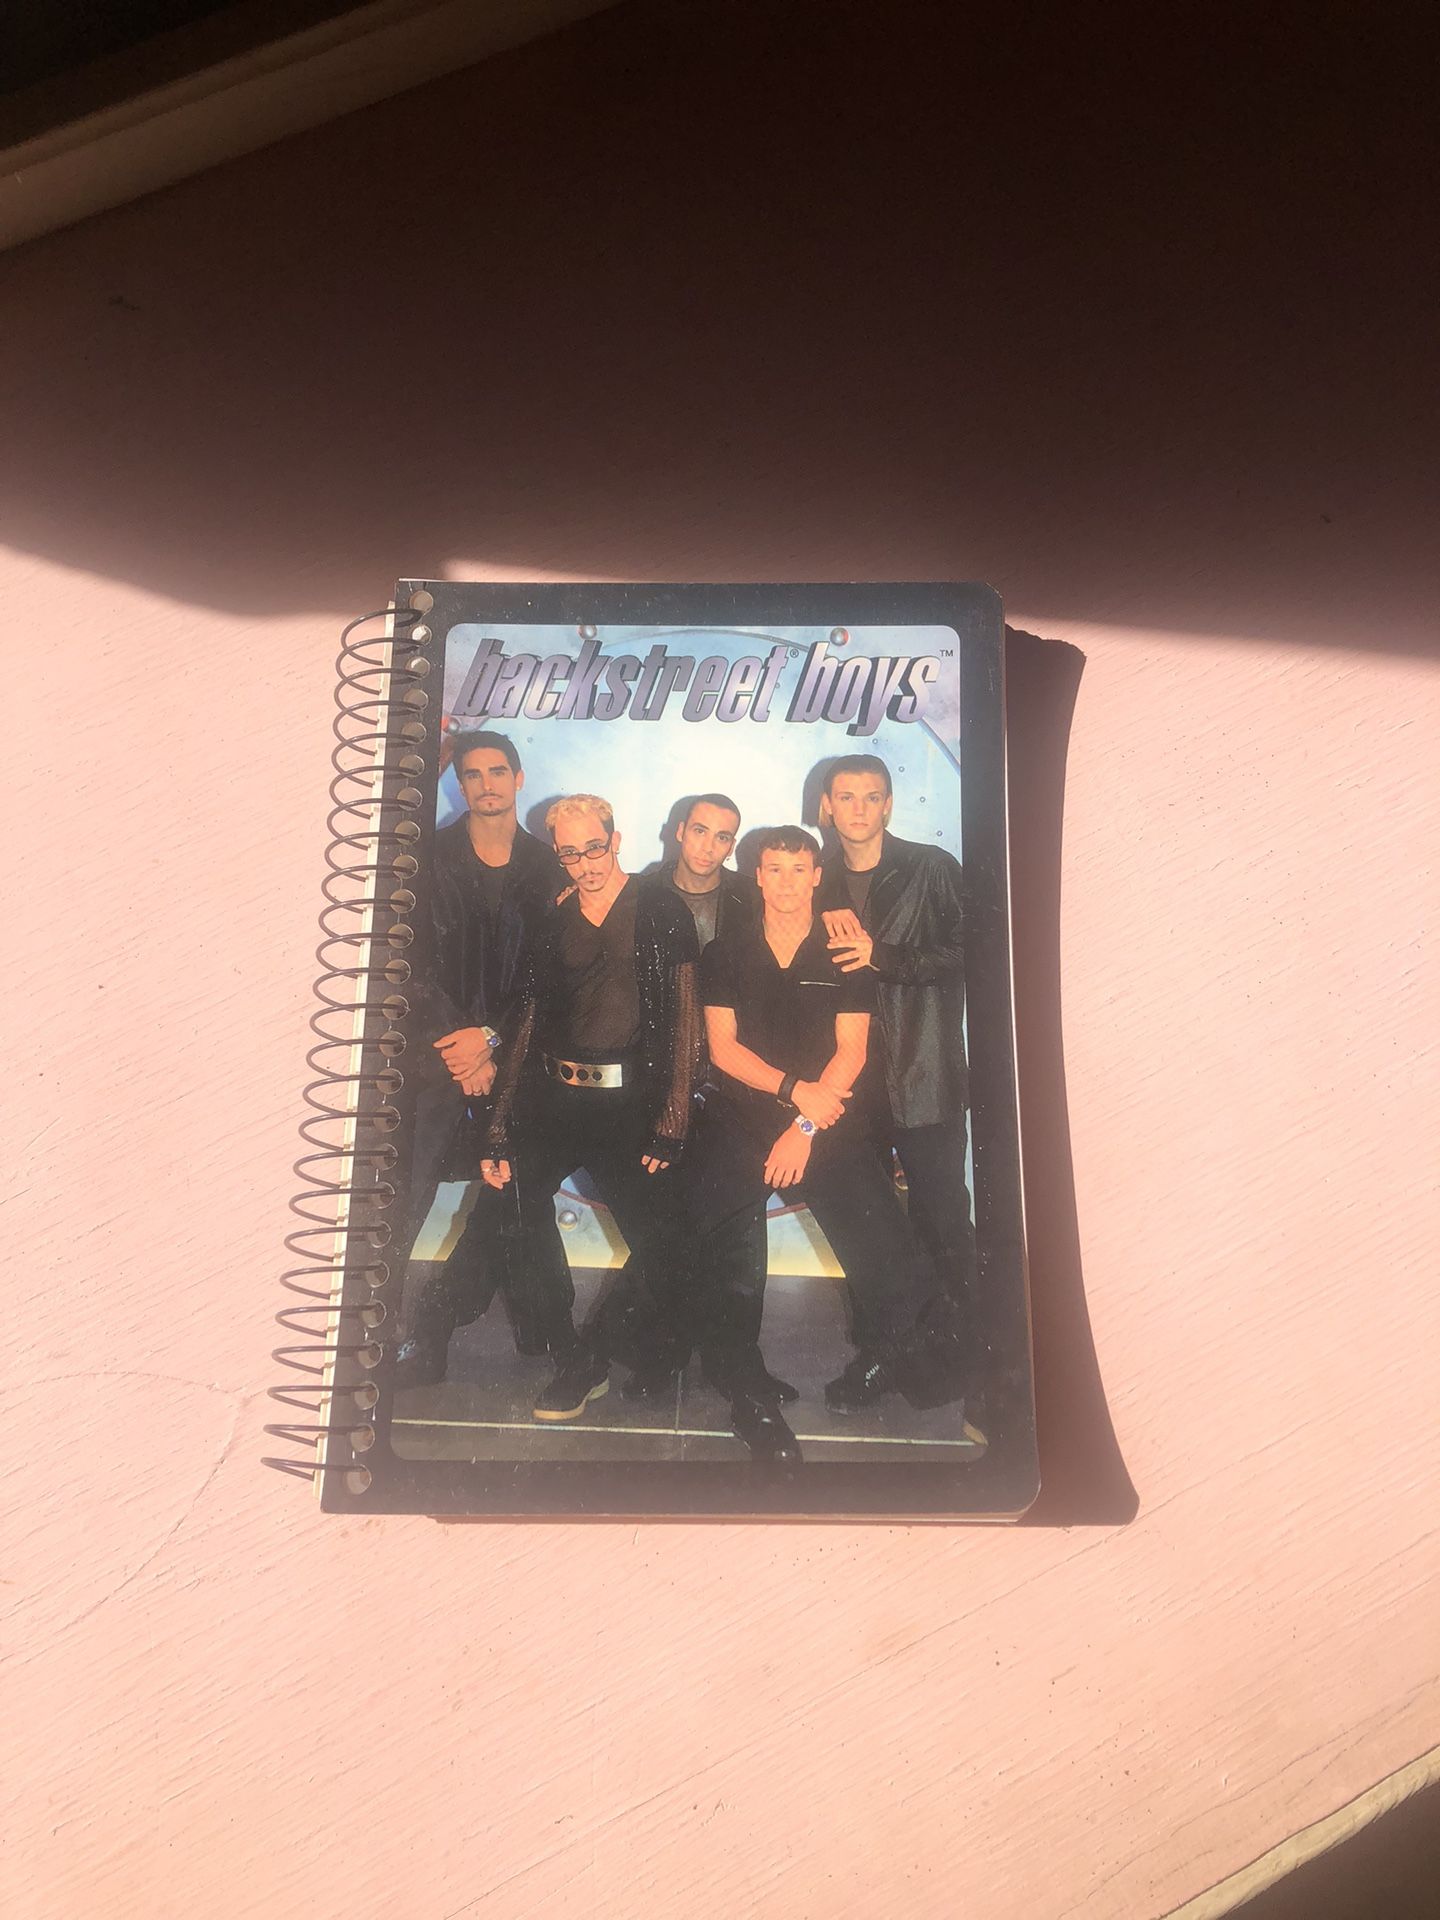 Backstreet Boys Notebook And Pictures